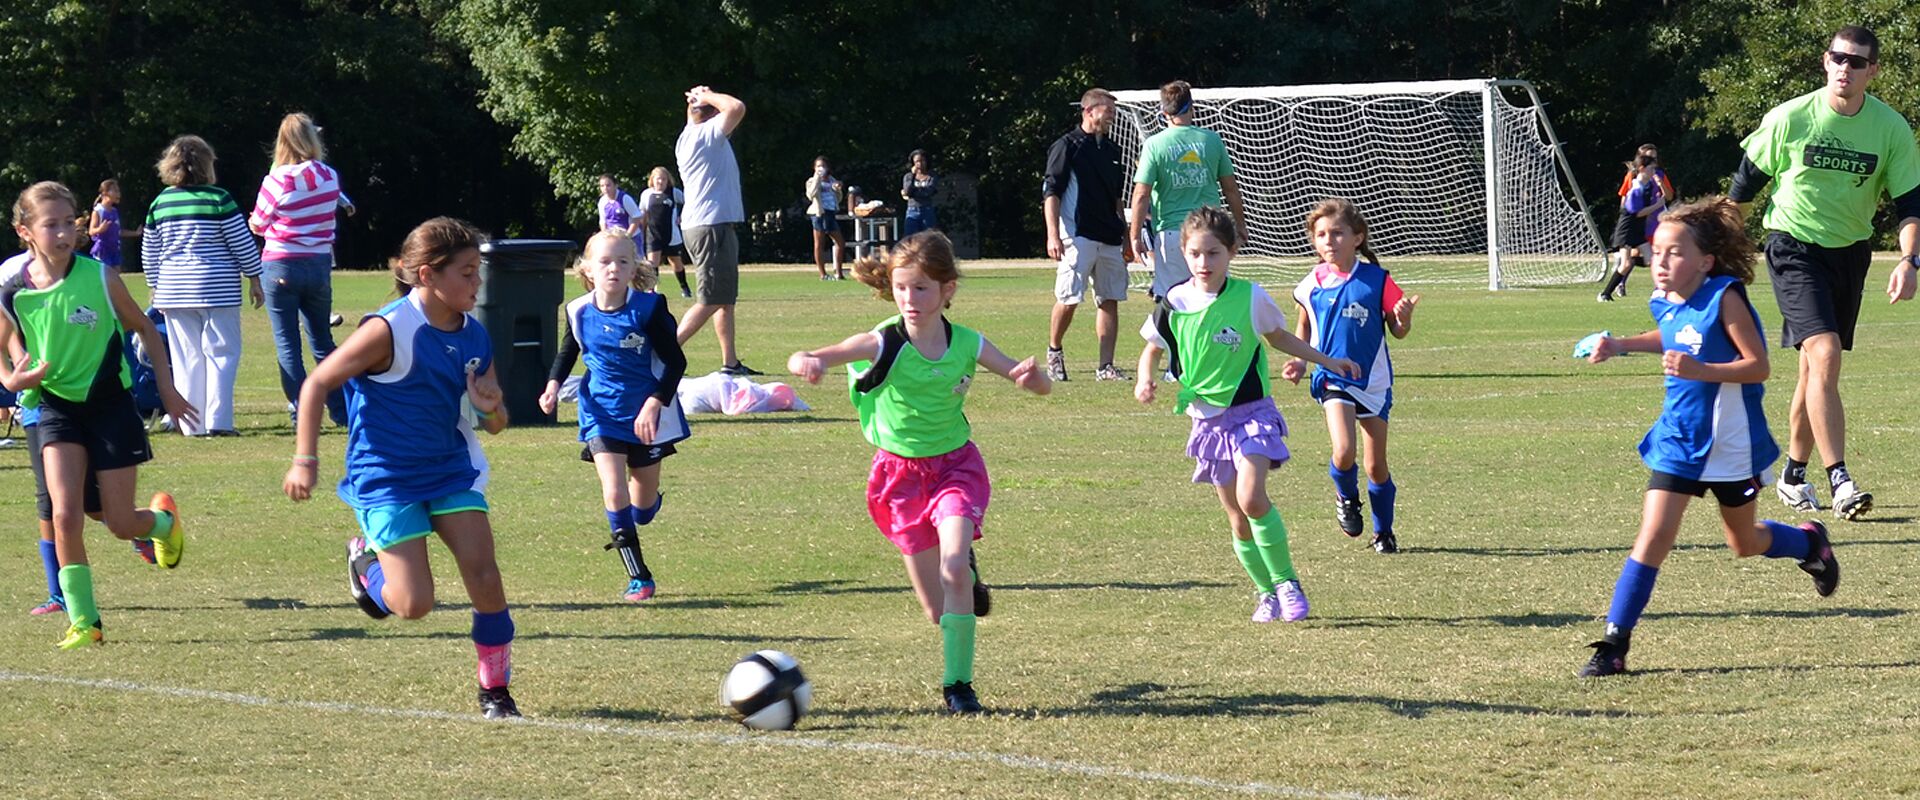 Soccer Day Camps Ymca Of Greater Charlotte